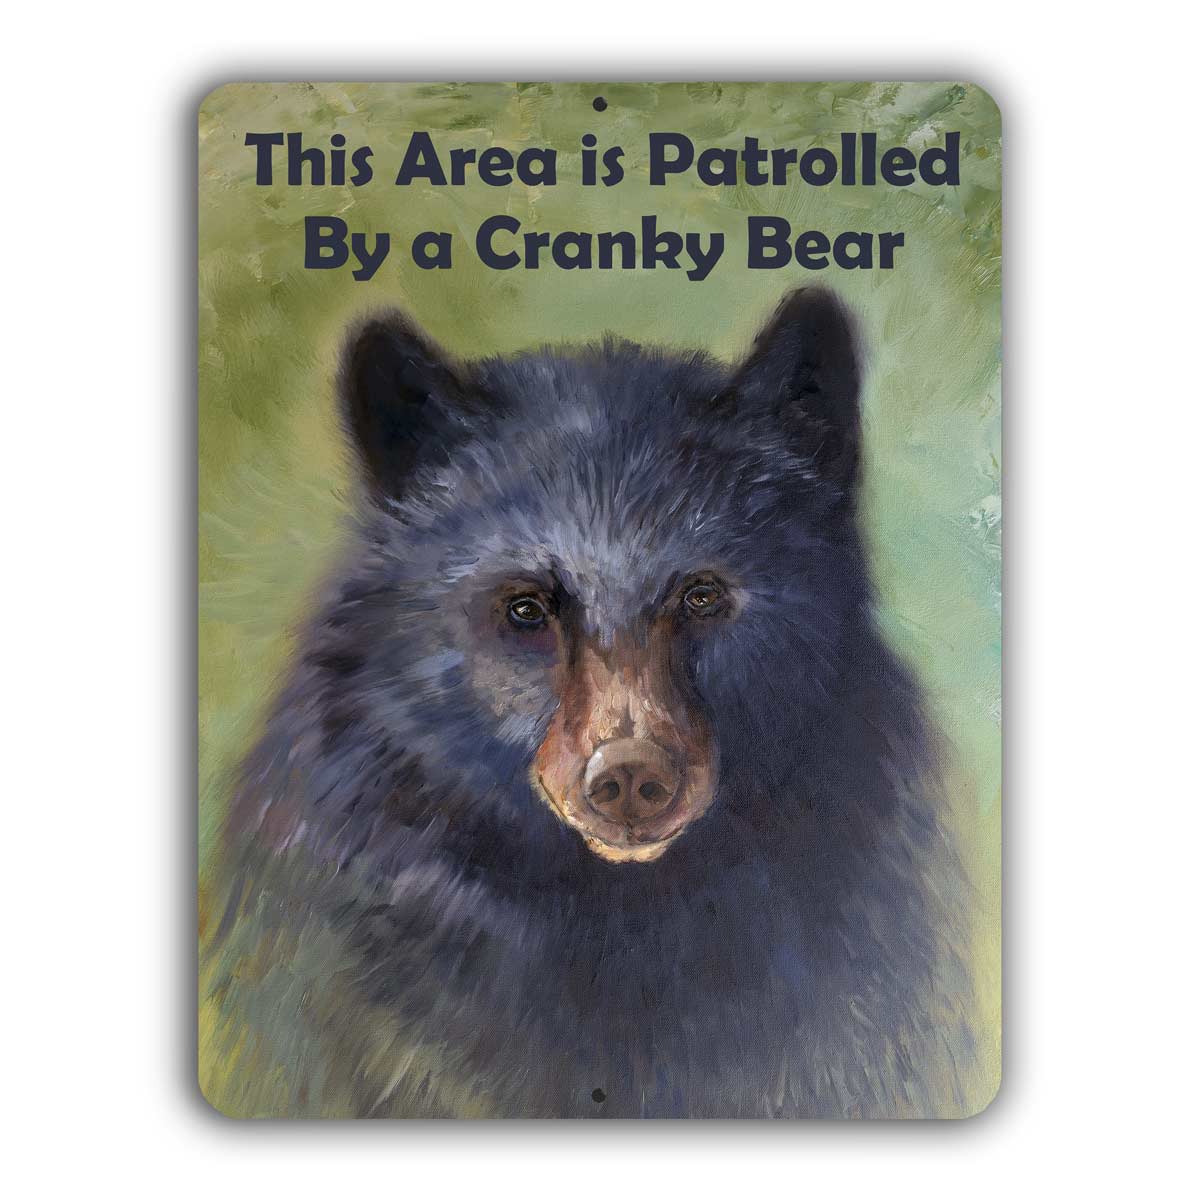 Patrolled By a Cranky Bear